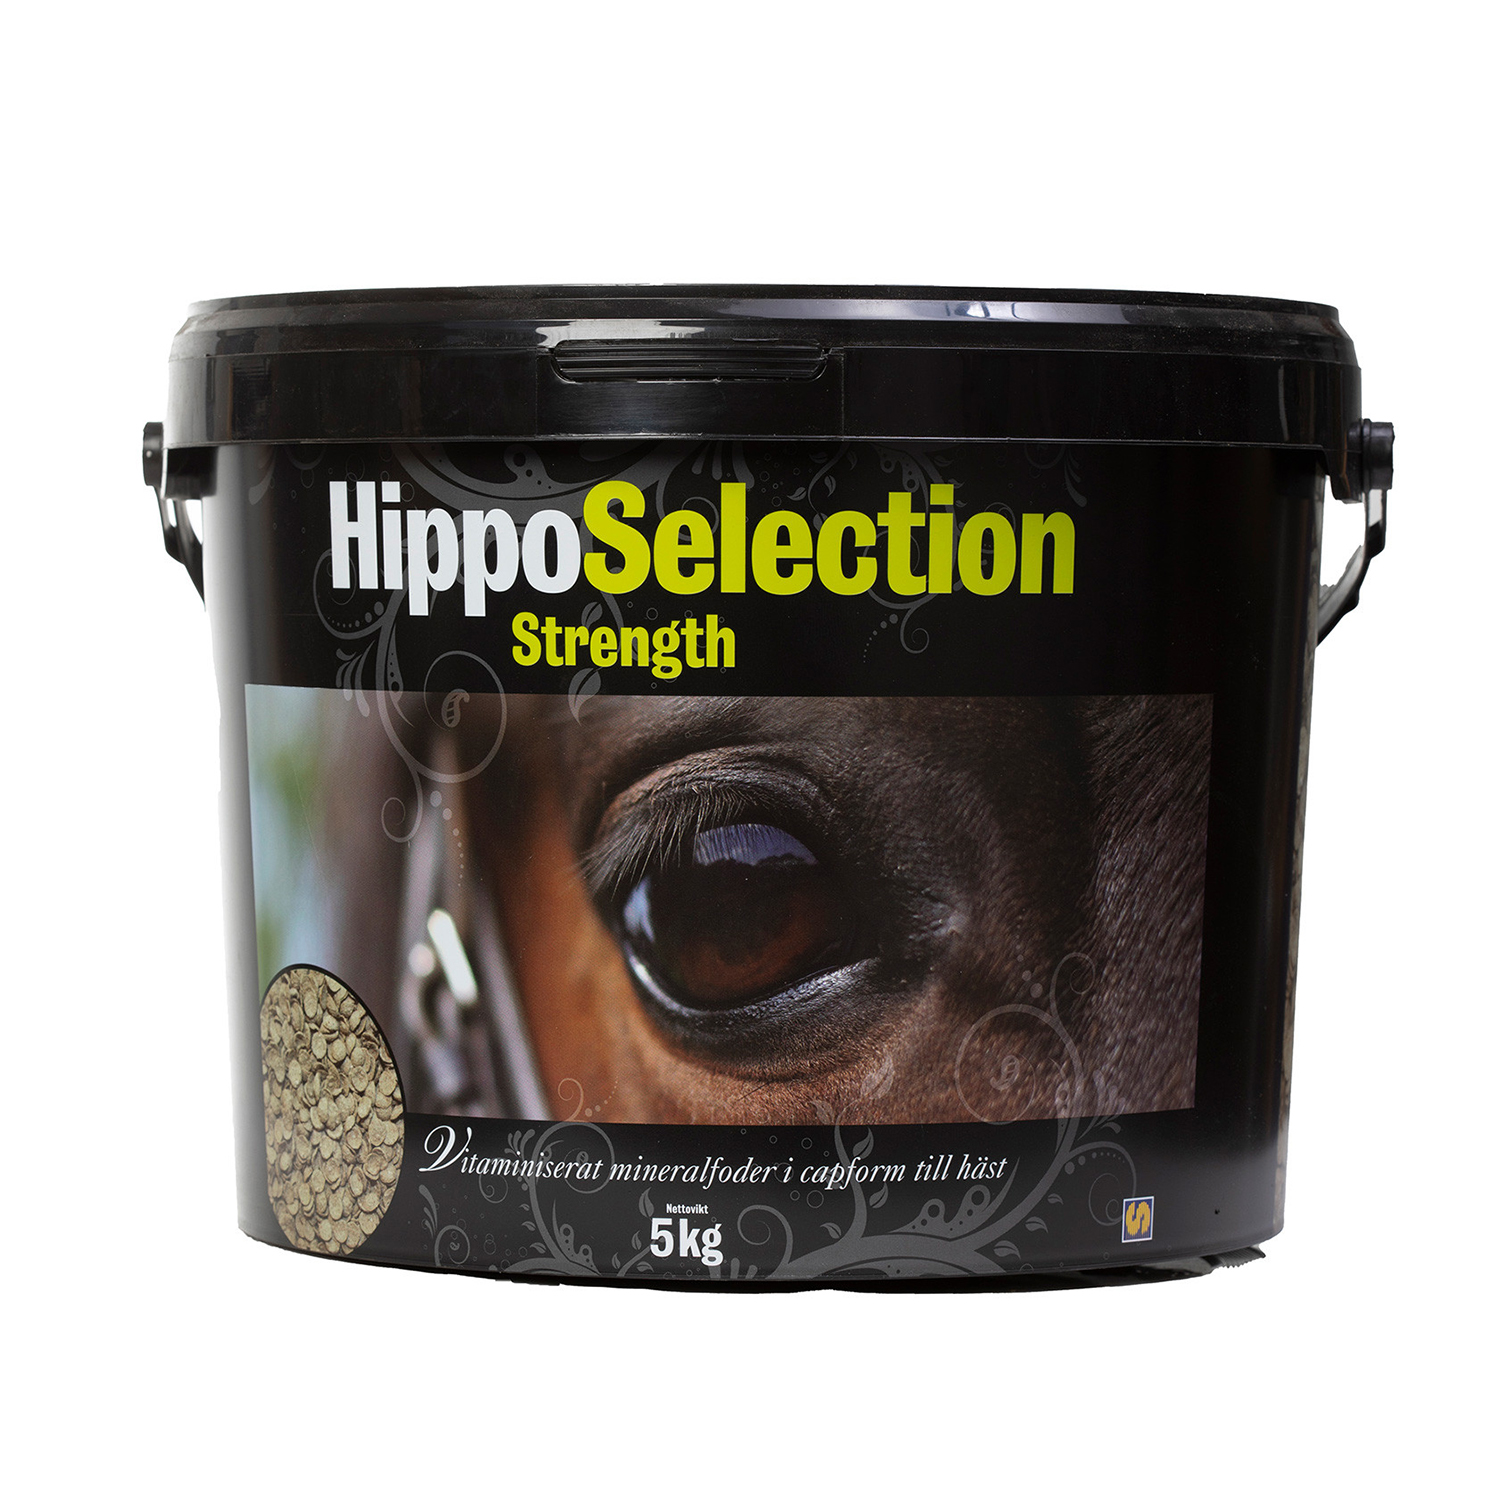 Hippo selection strength caps